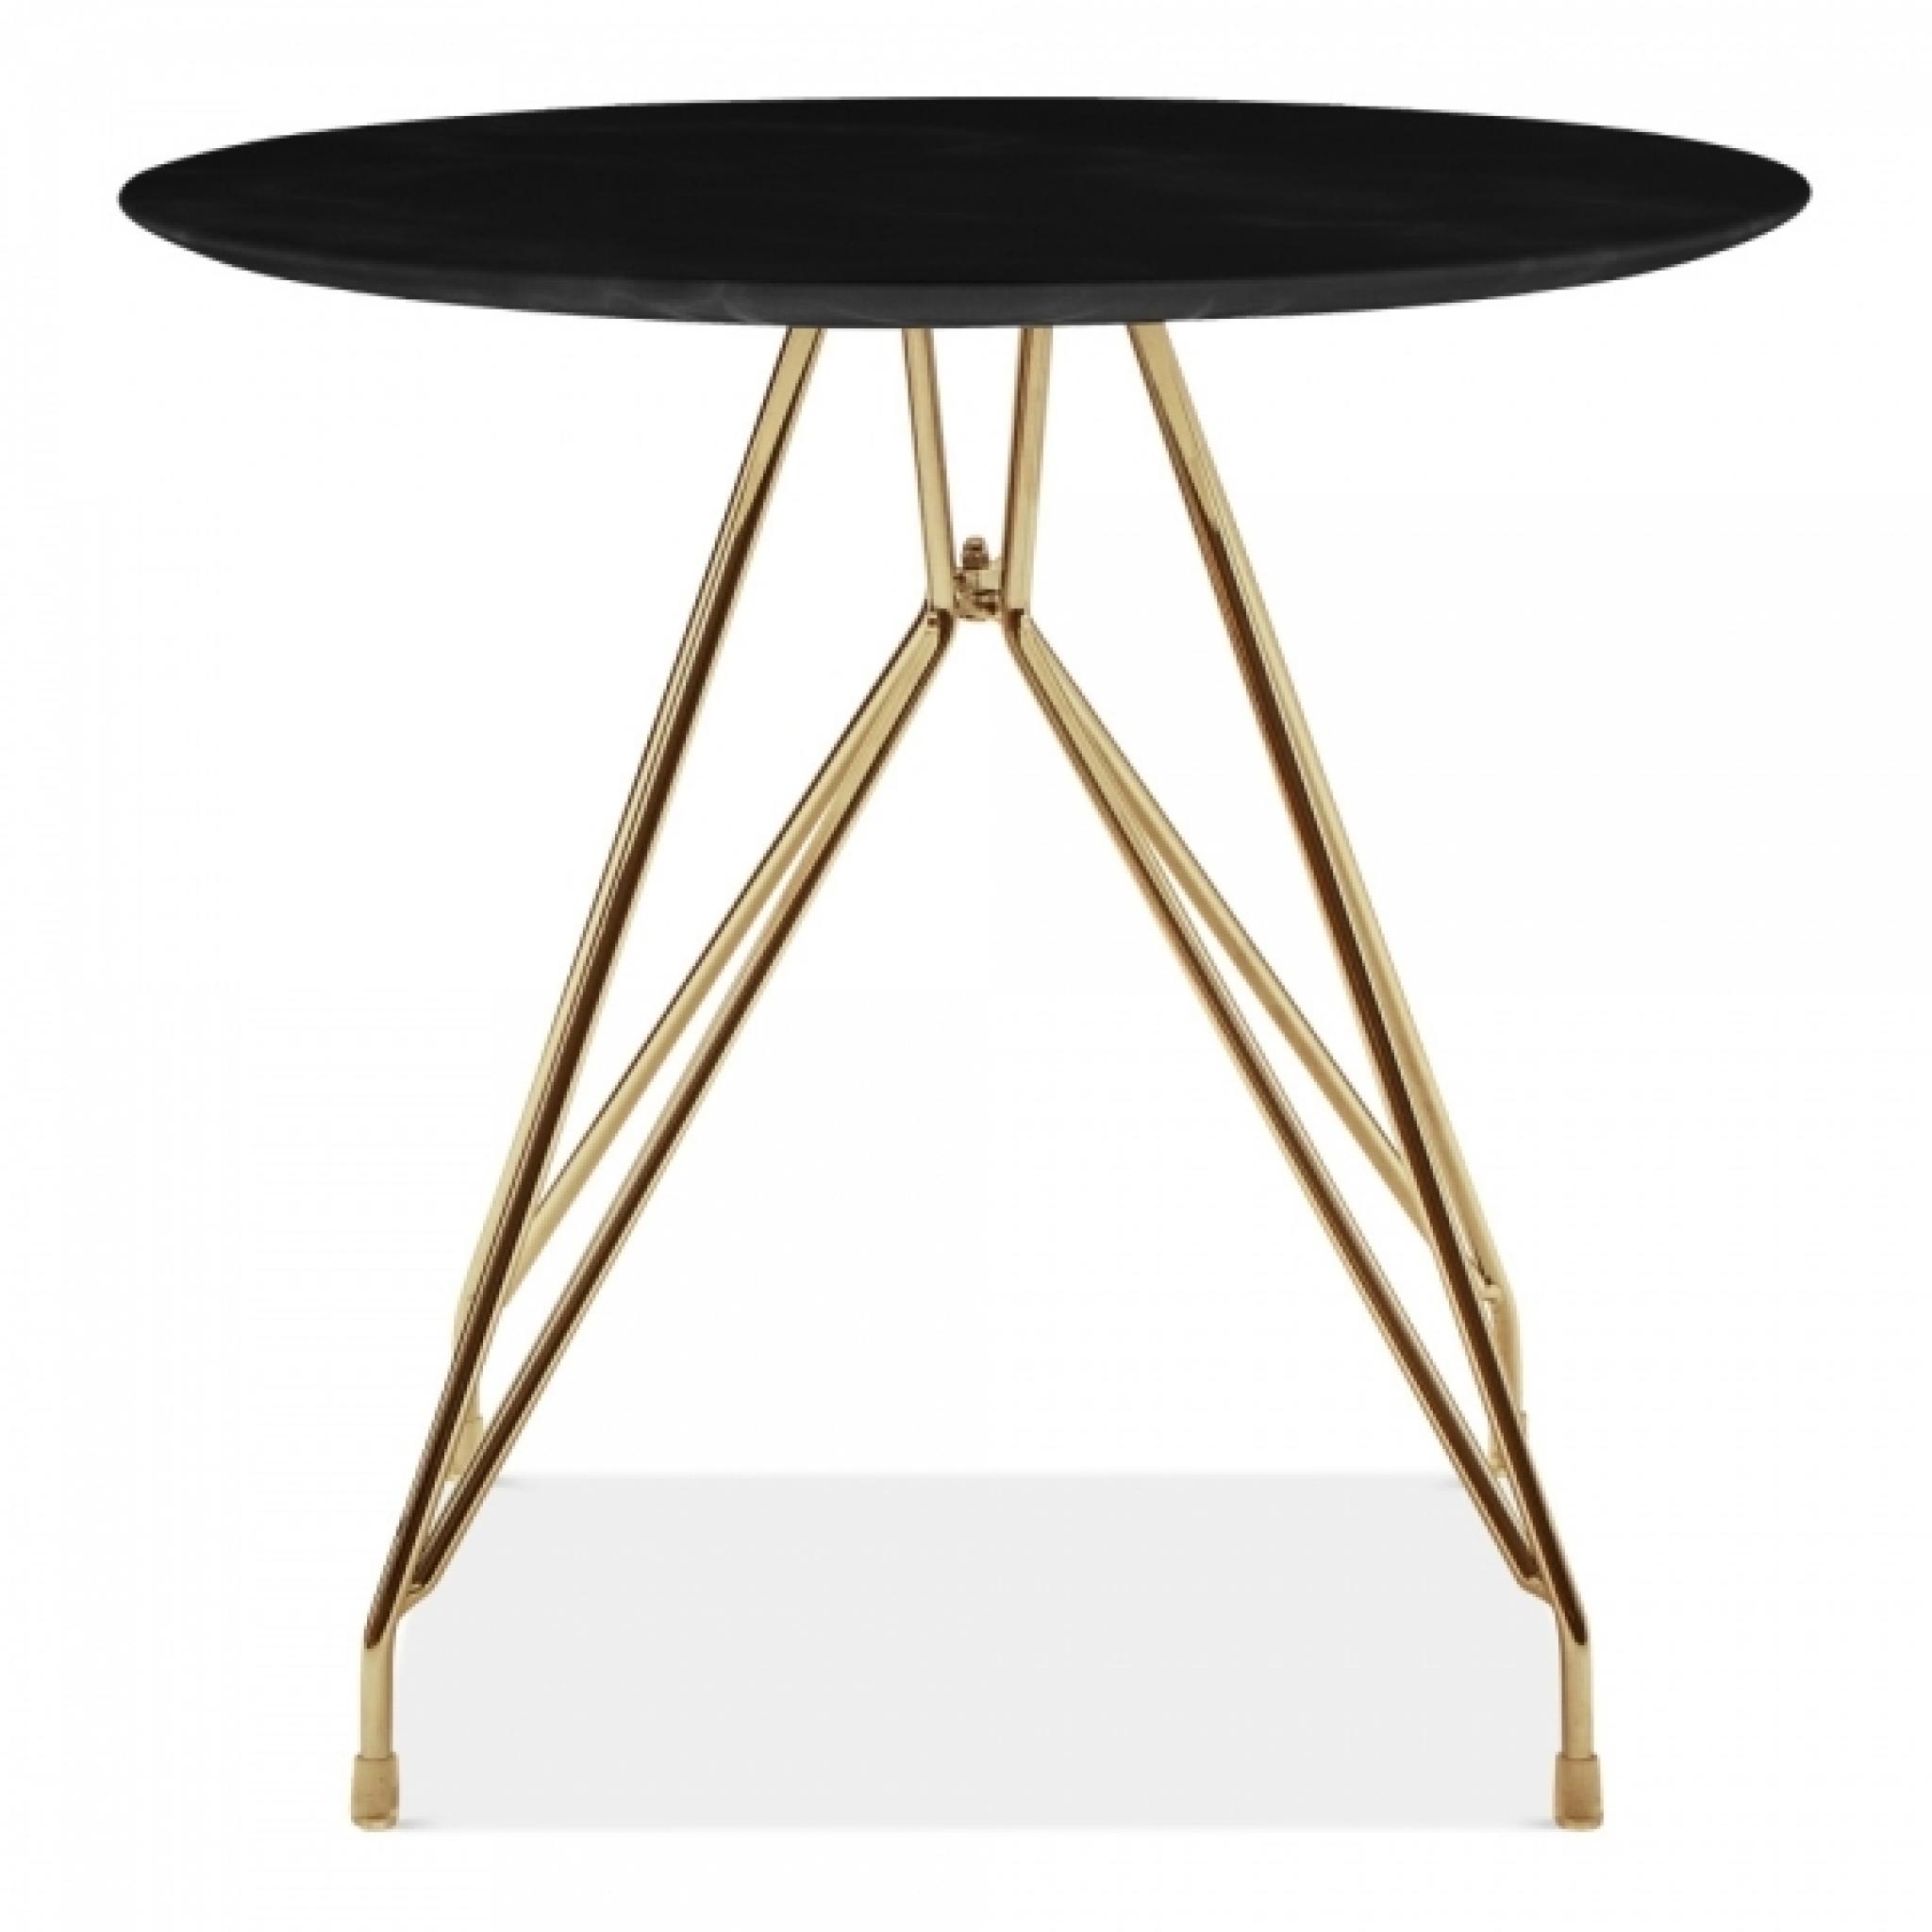 MODA CD1 ROUND MARBLE SIDE TABLE WITH BRASS METAL LEGS, BLACK 52CM